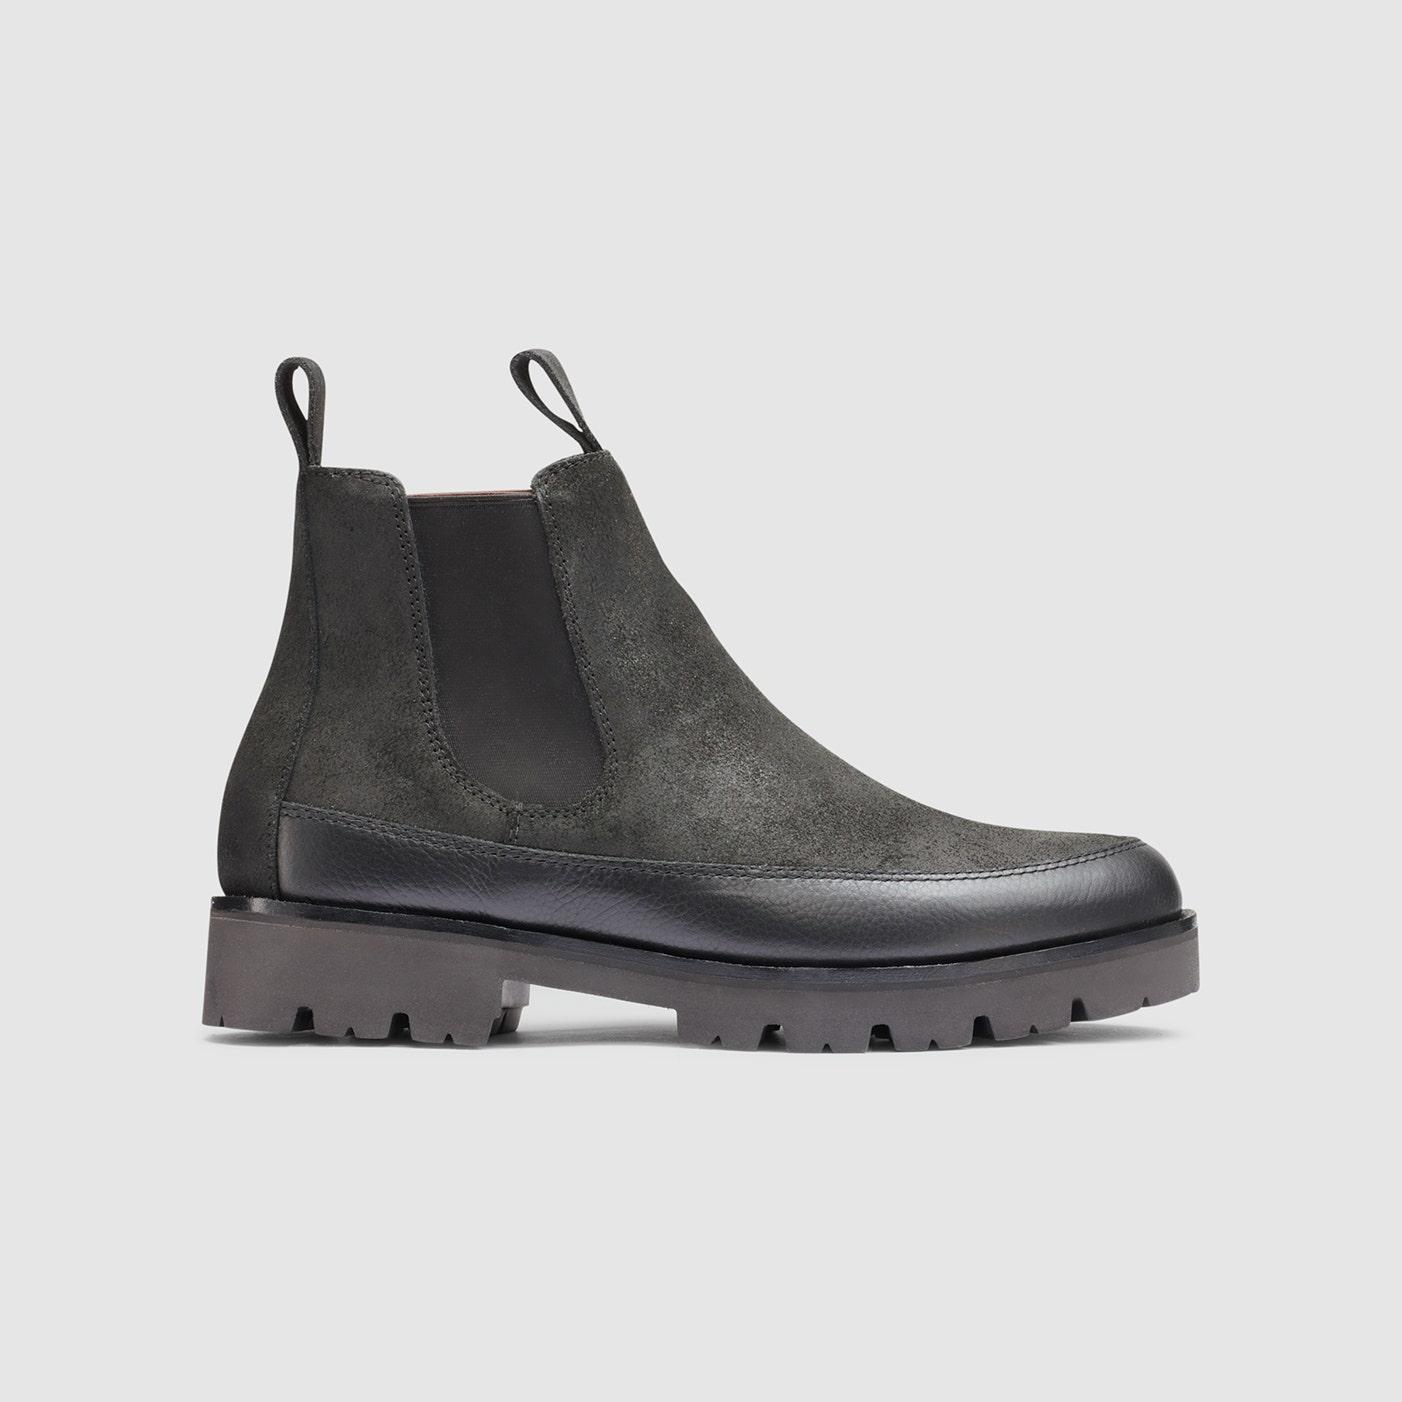 G.H. Bass Mens Ranger Chelsea Boots Product Image